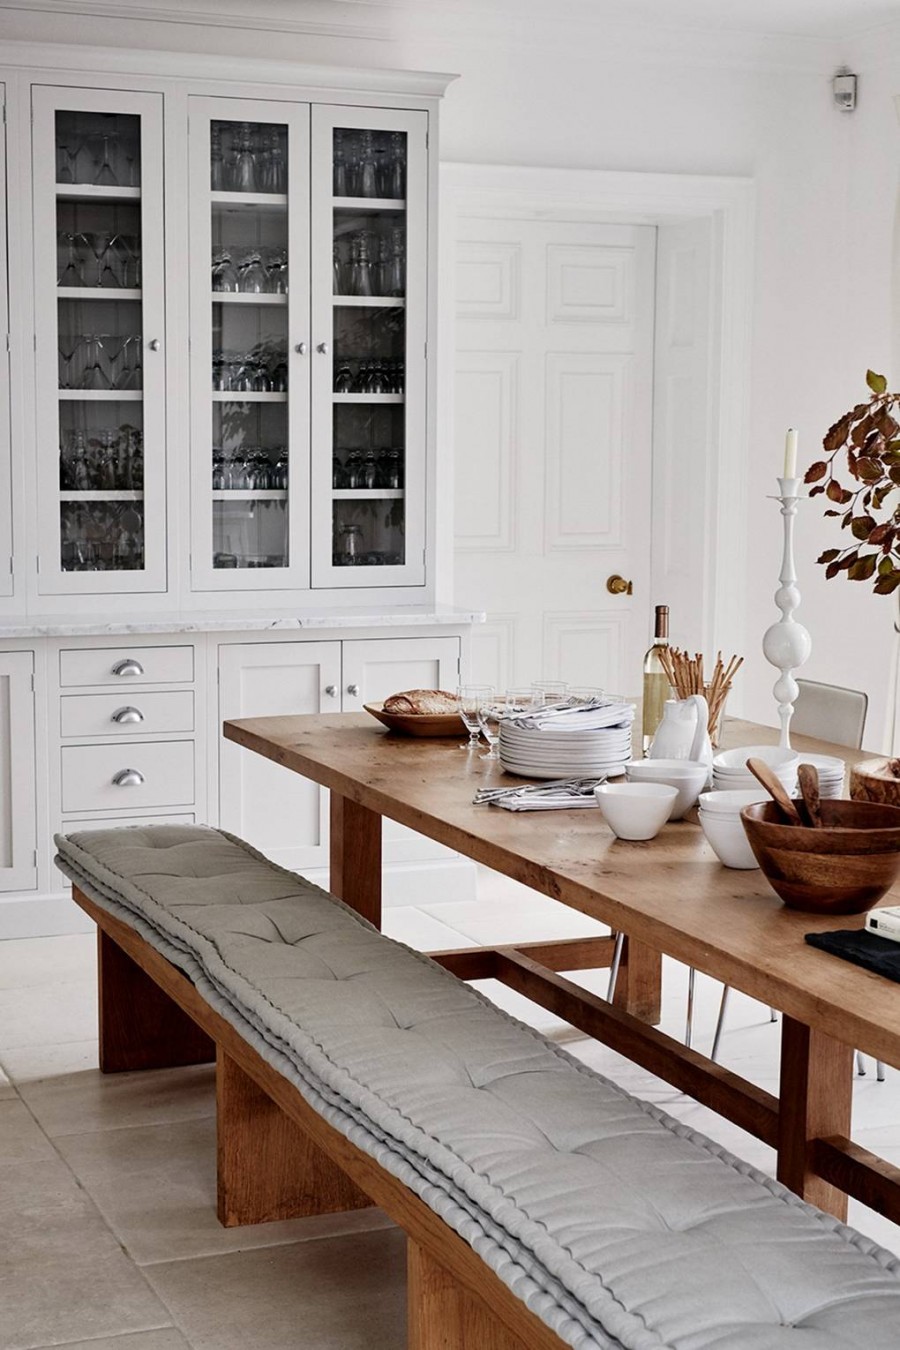 For the love of white- Chrissie Rucker's amazing house in the English countryside